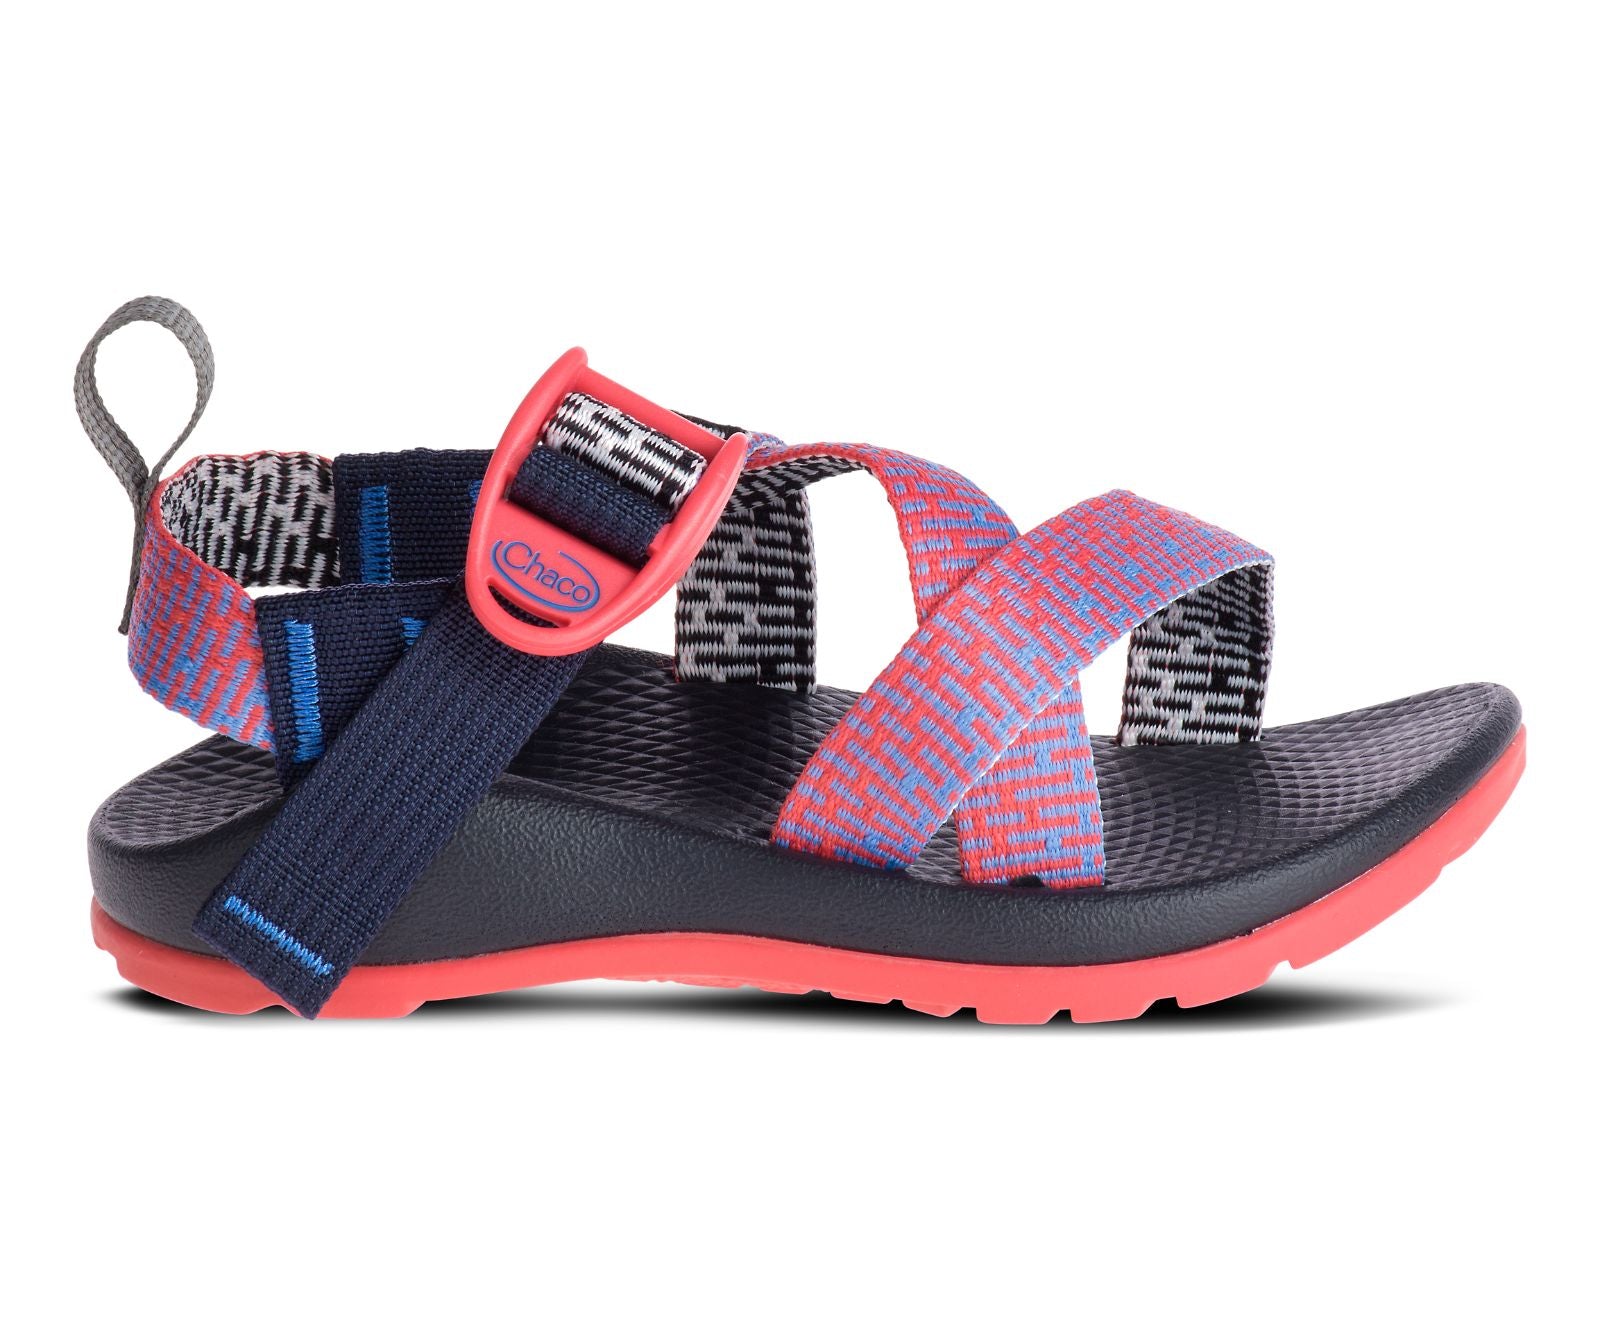 Z/1 EcoTread Kids Sandals - Penny Coral